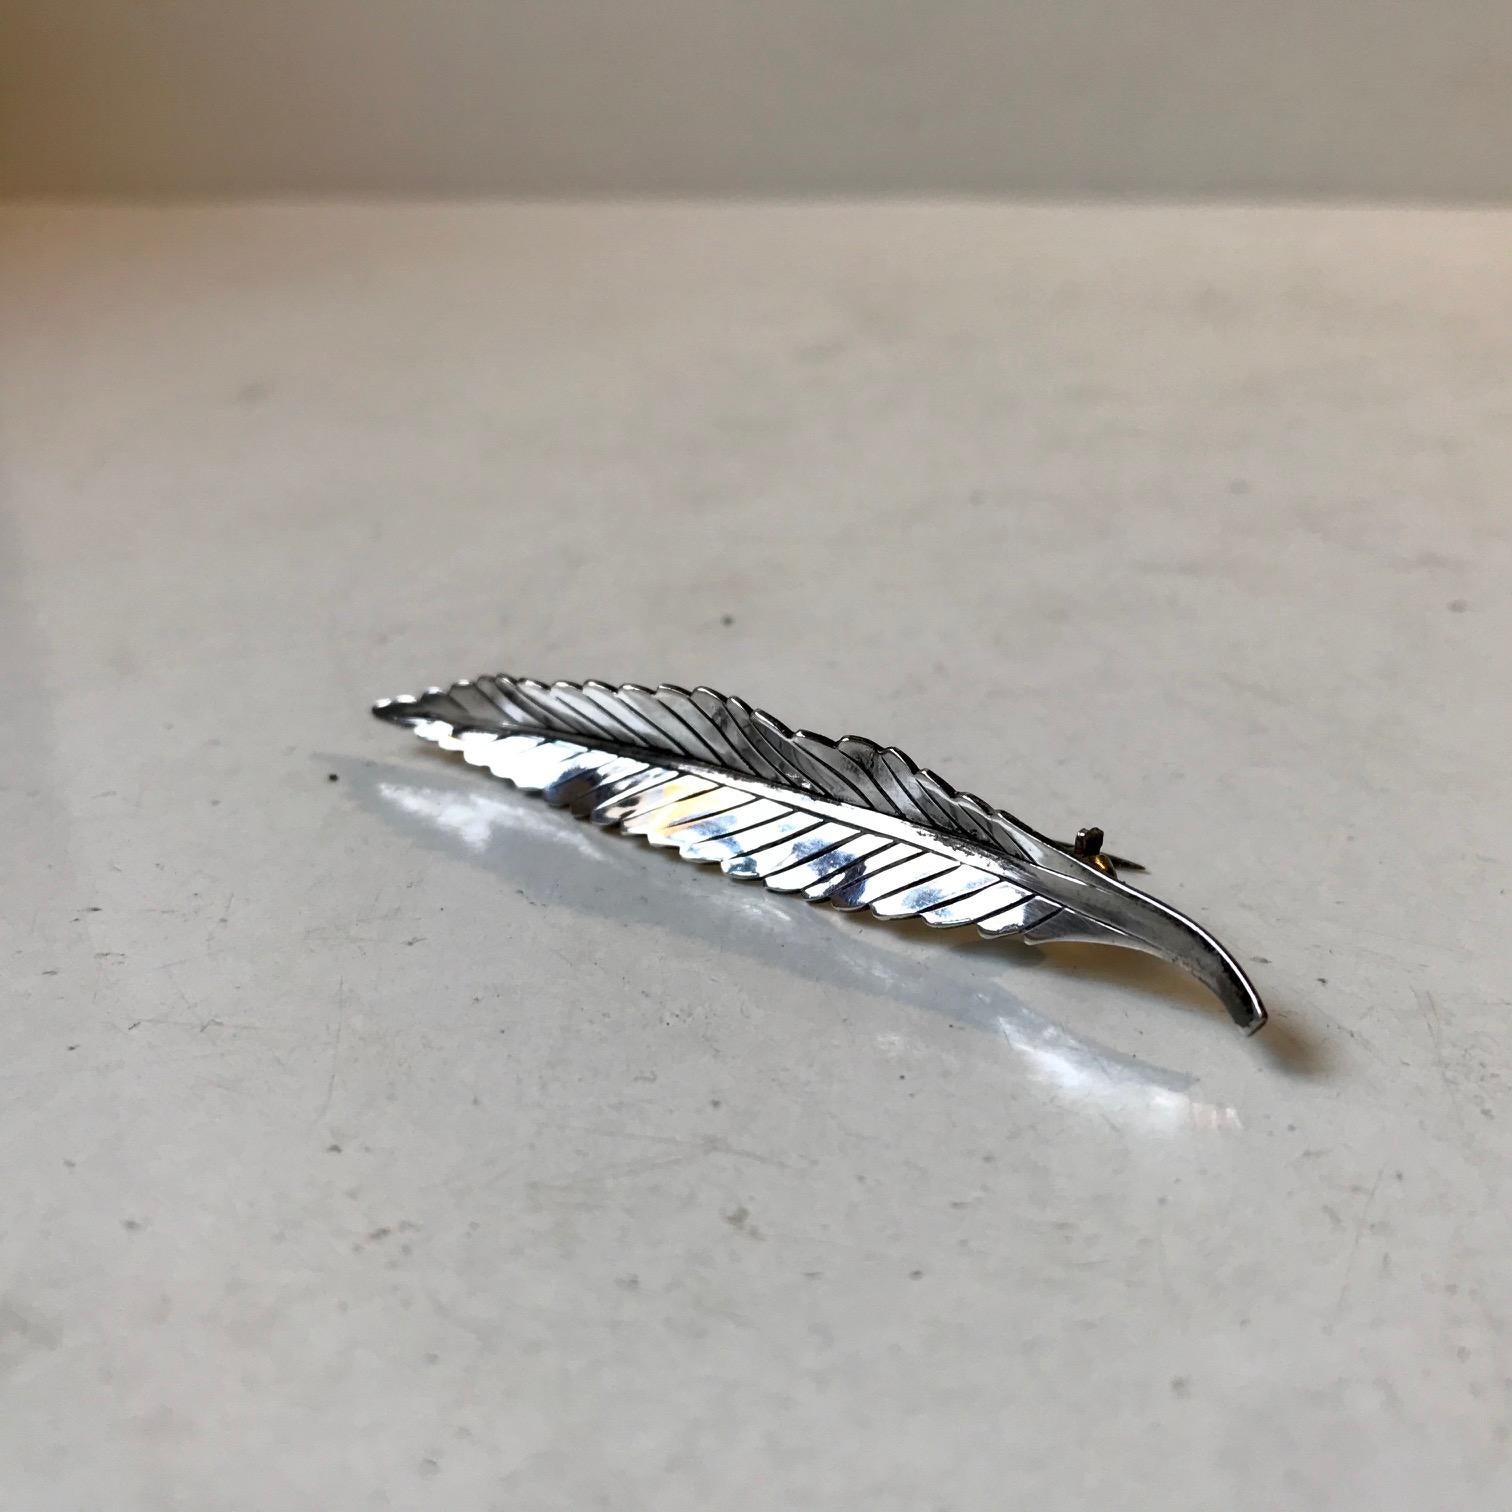 A naturalistically shaped leaf brooch in sterling silver 925/1000. Designed by Getrud Engel and made by Anton Michelsen in Denmark circa 1950. This particular leaf design is by far the rarest in the Michelsen line-up. It is hallmarked/signed: